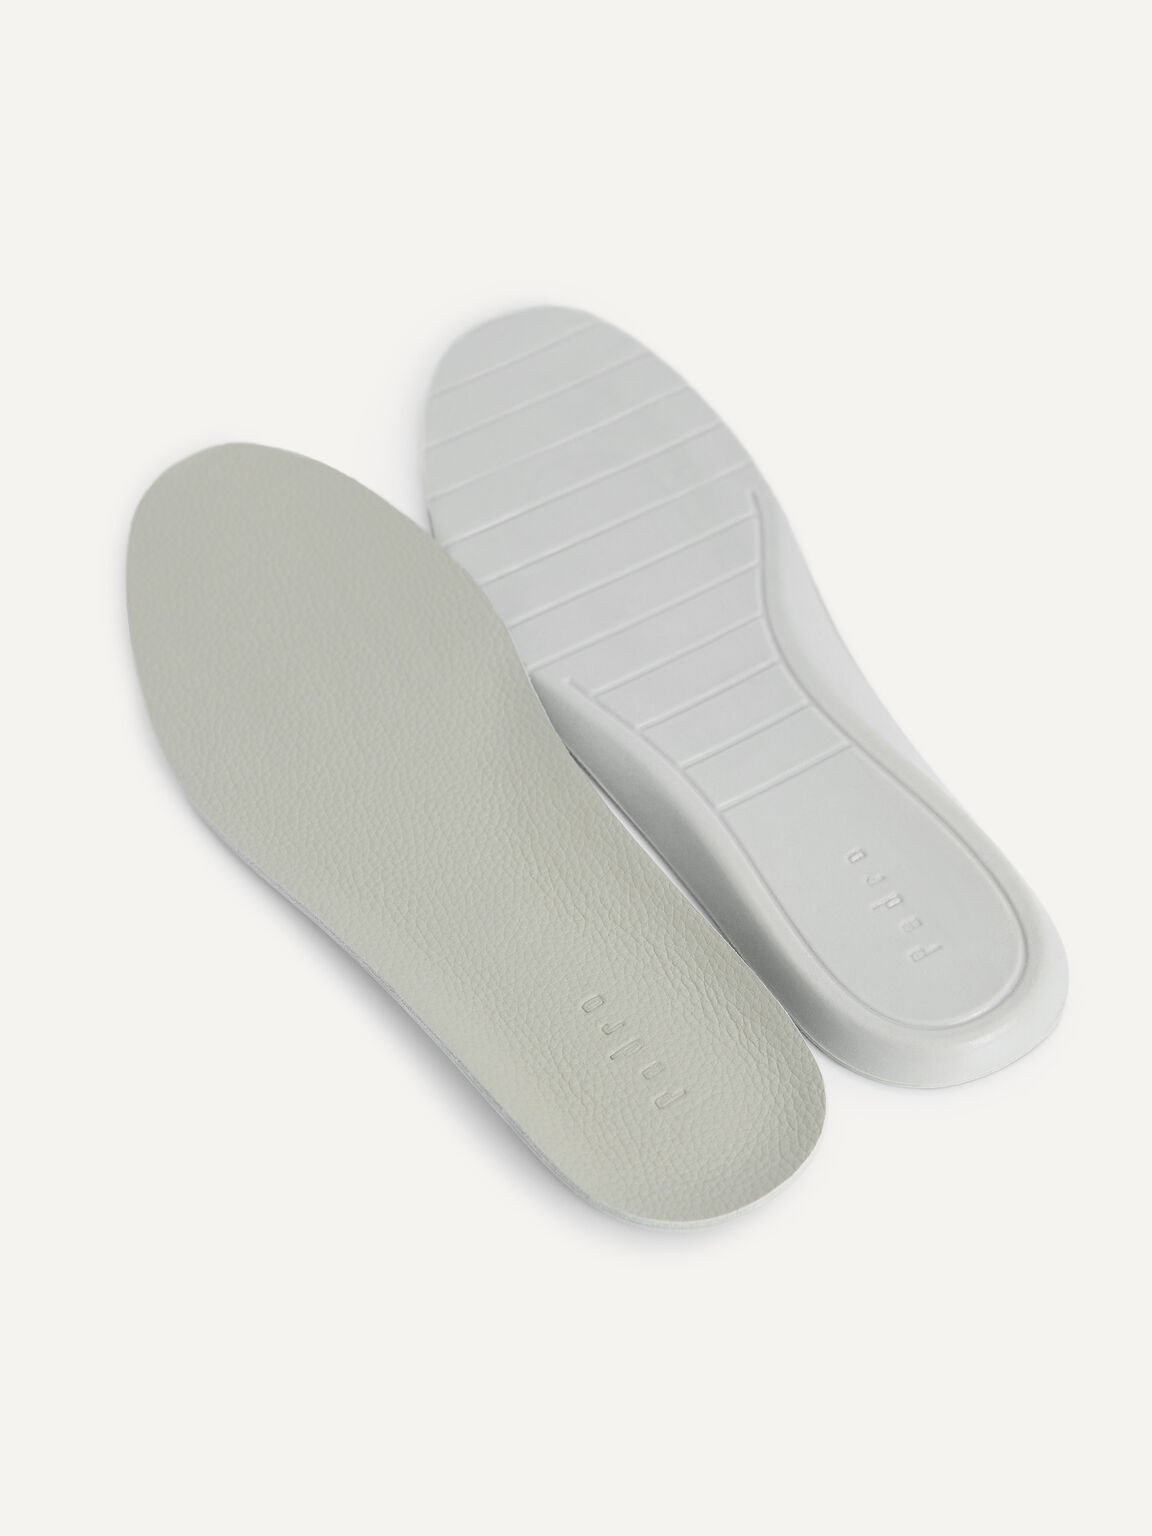 Sports Cushion Leather Insole, Light Grey, hi-res